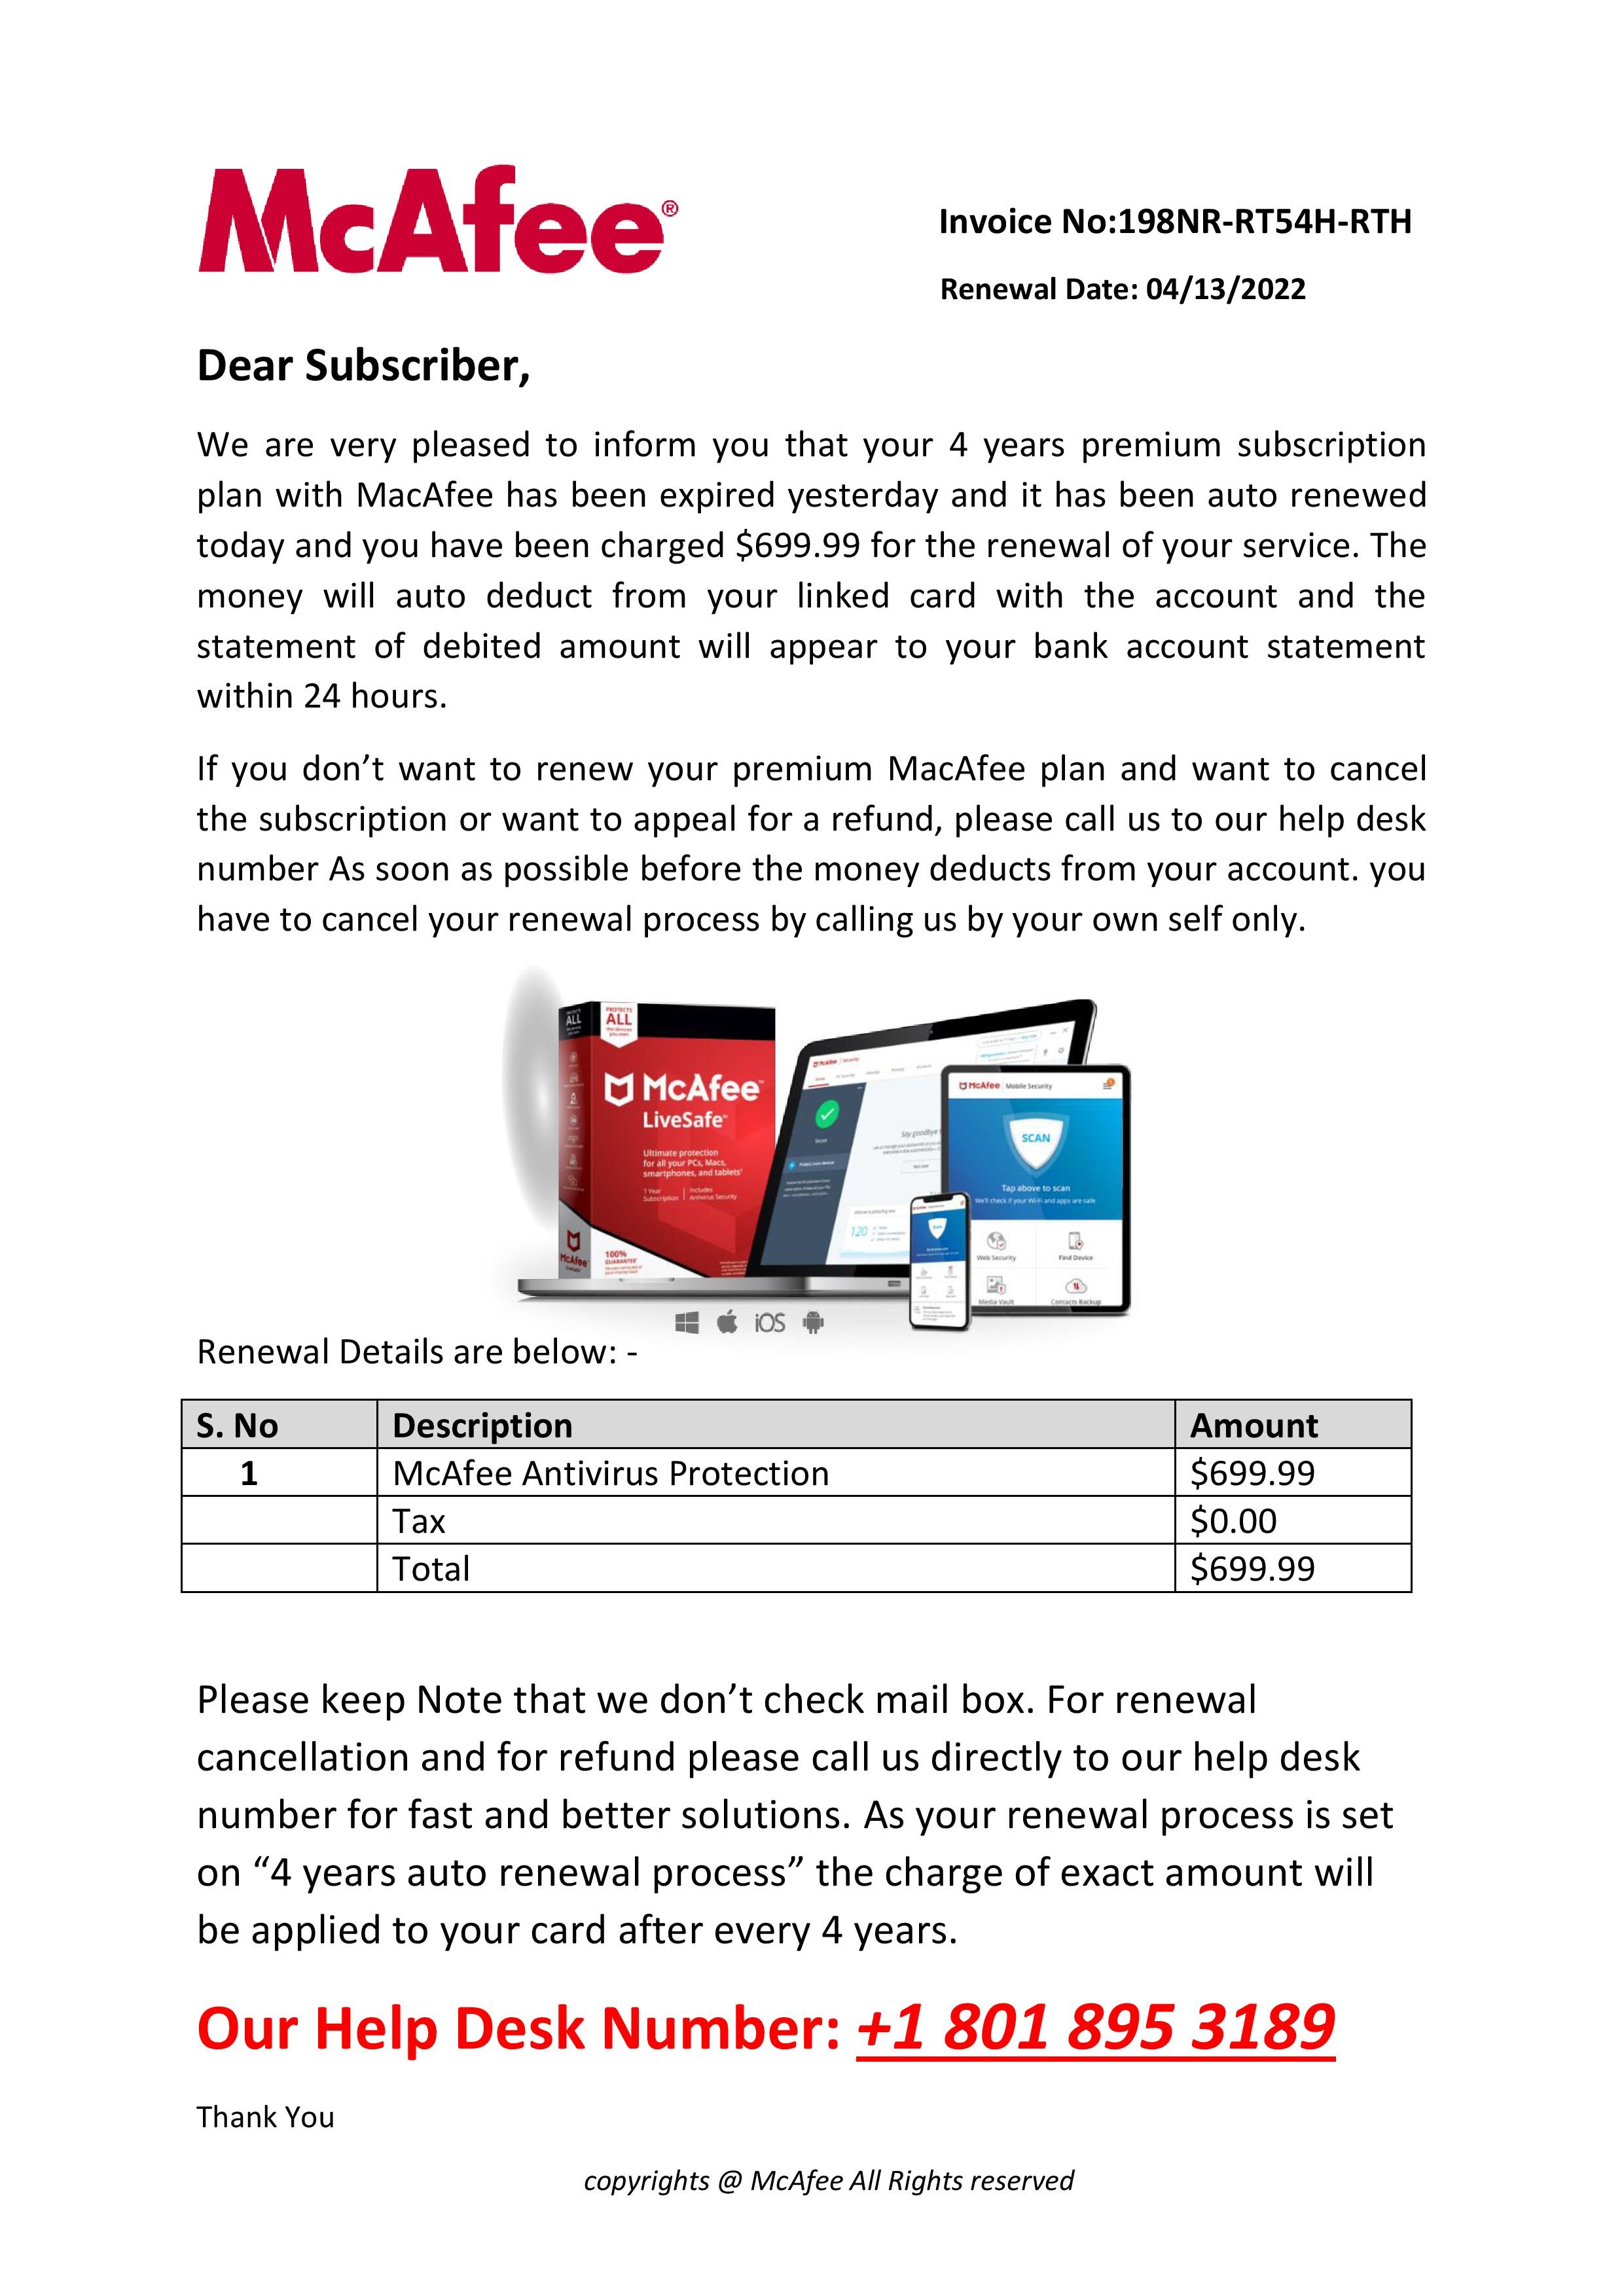 McAfee Renewal Email Scam Renew Of Antivirus Protection